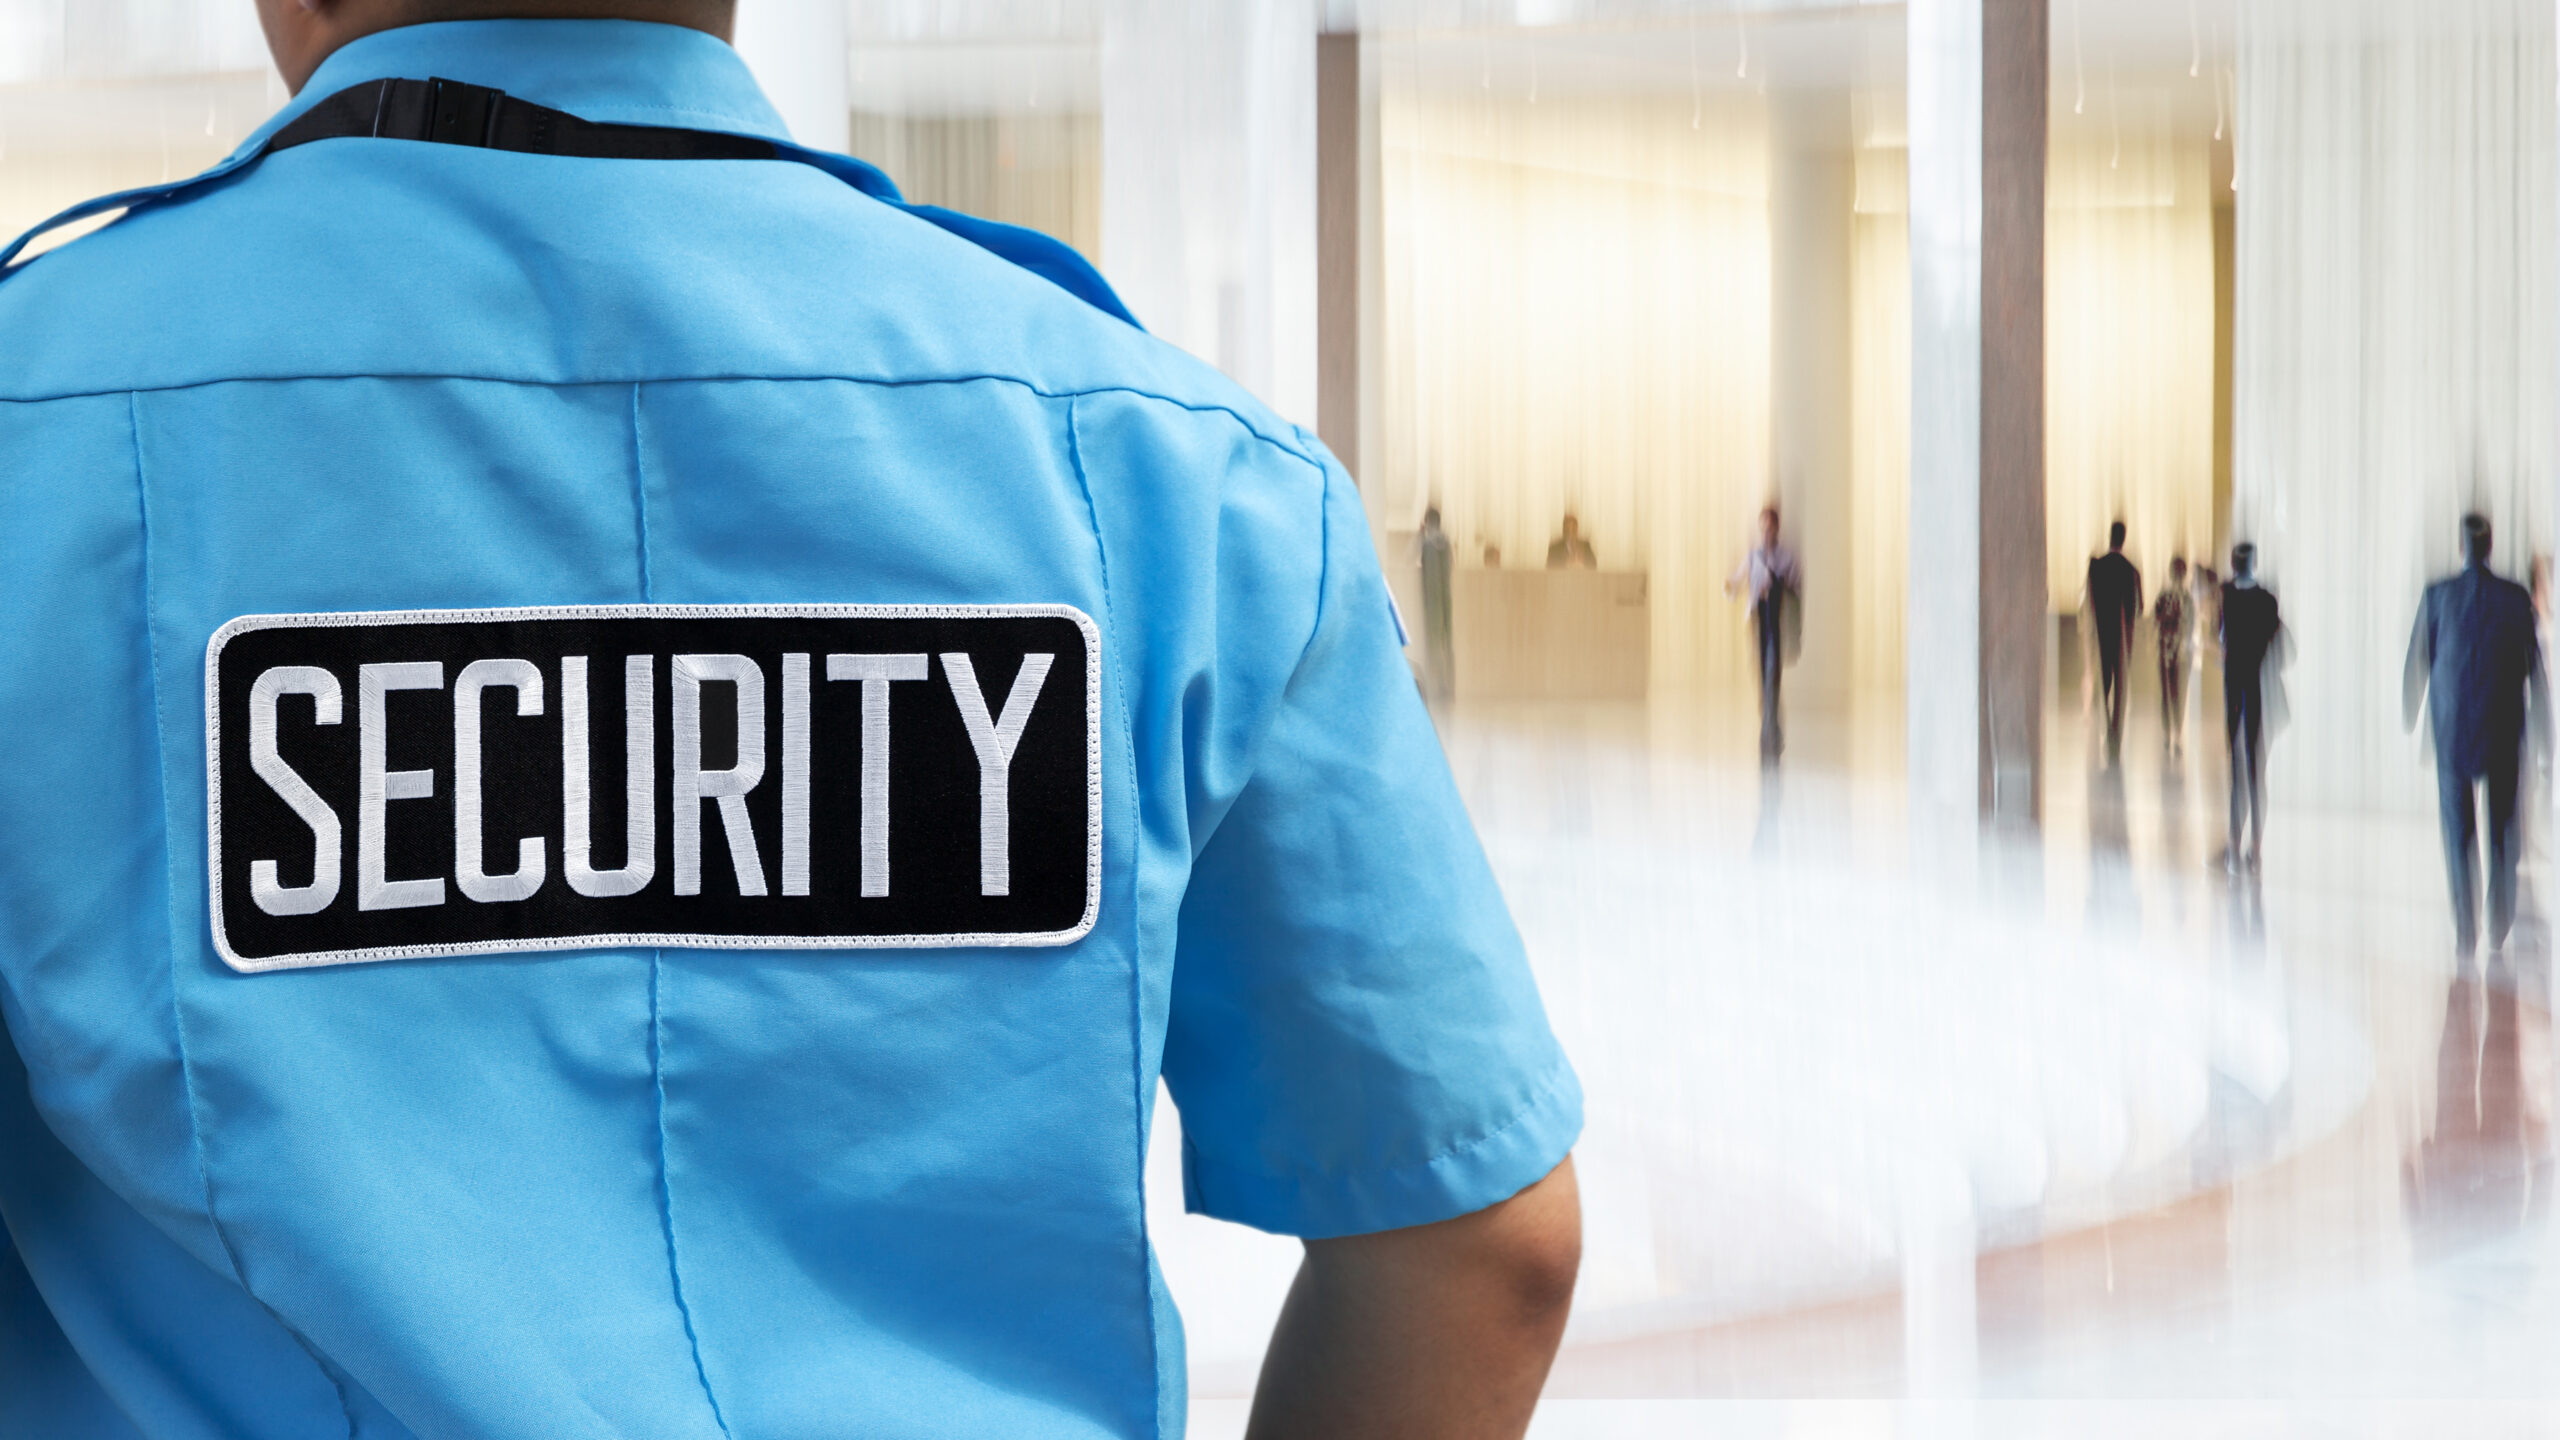 Security guard wears uniform with reflective billboard patch